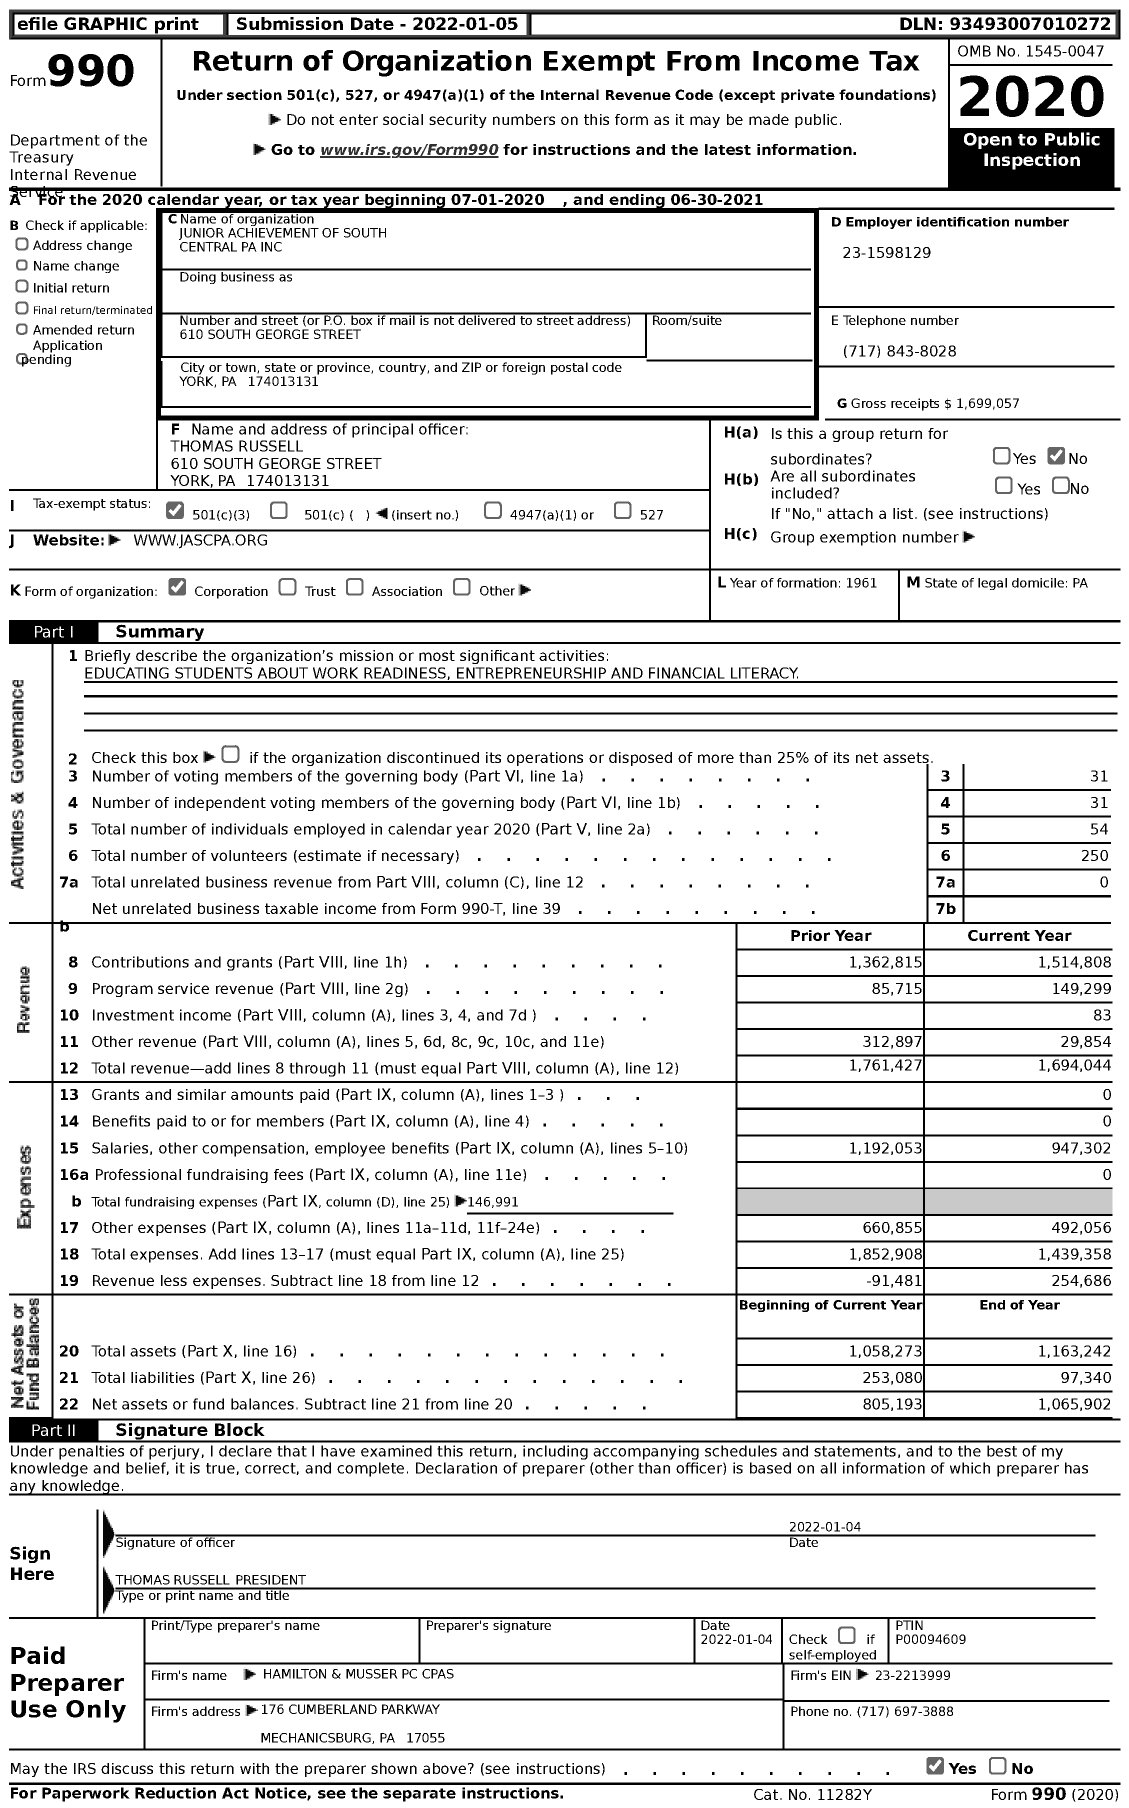 Image of first page of 2020 Form 990 for Junior Achievement of South Central Pa (JASCP)